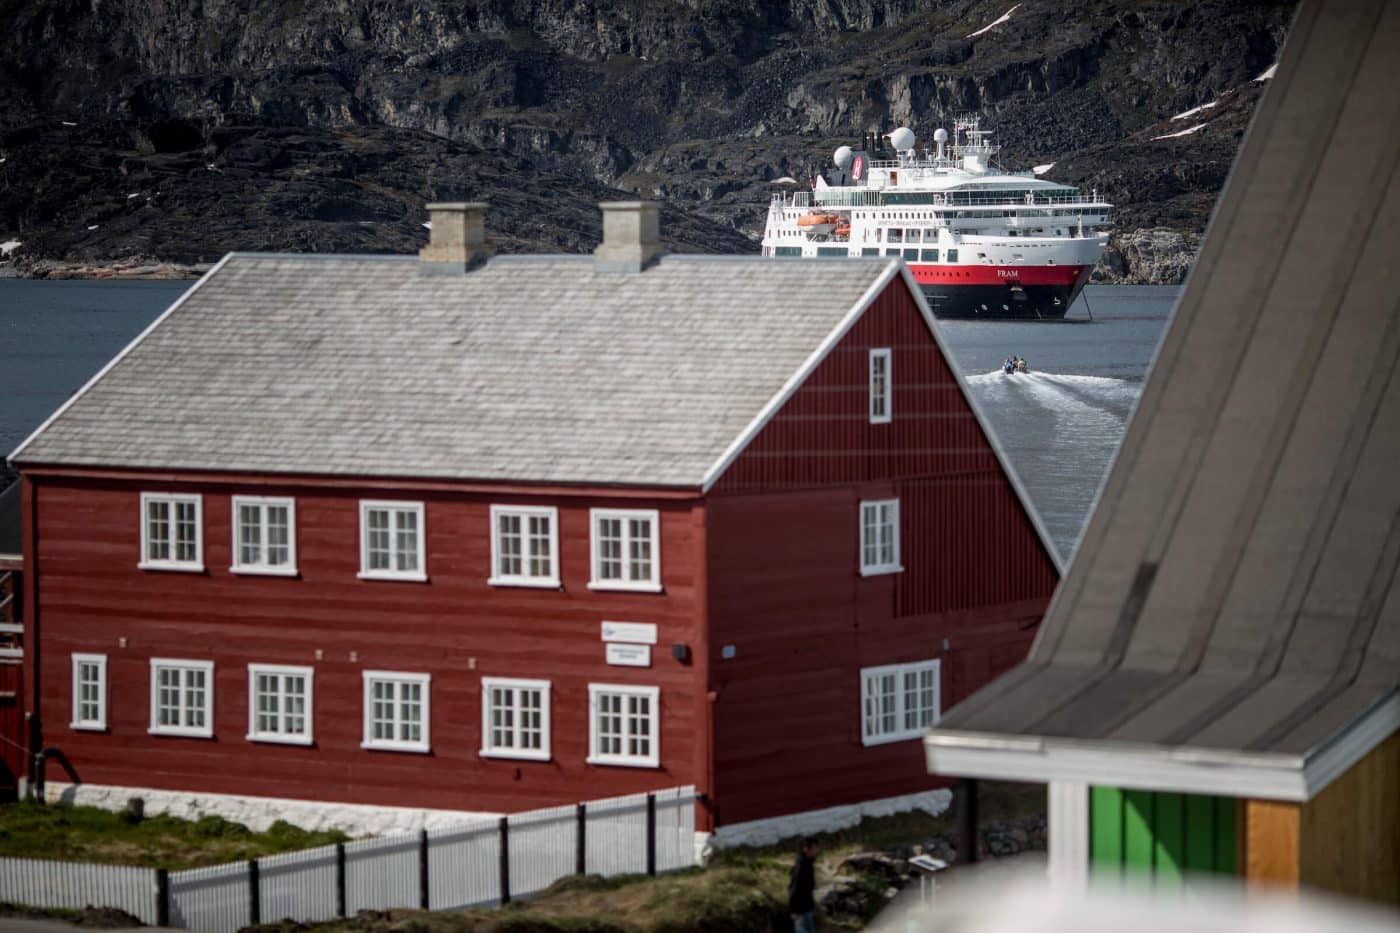 MS Fram behind old building in Qeqertarsauq in Greenland. Photo by Mads Pihl.